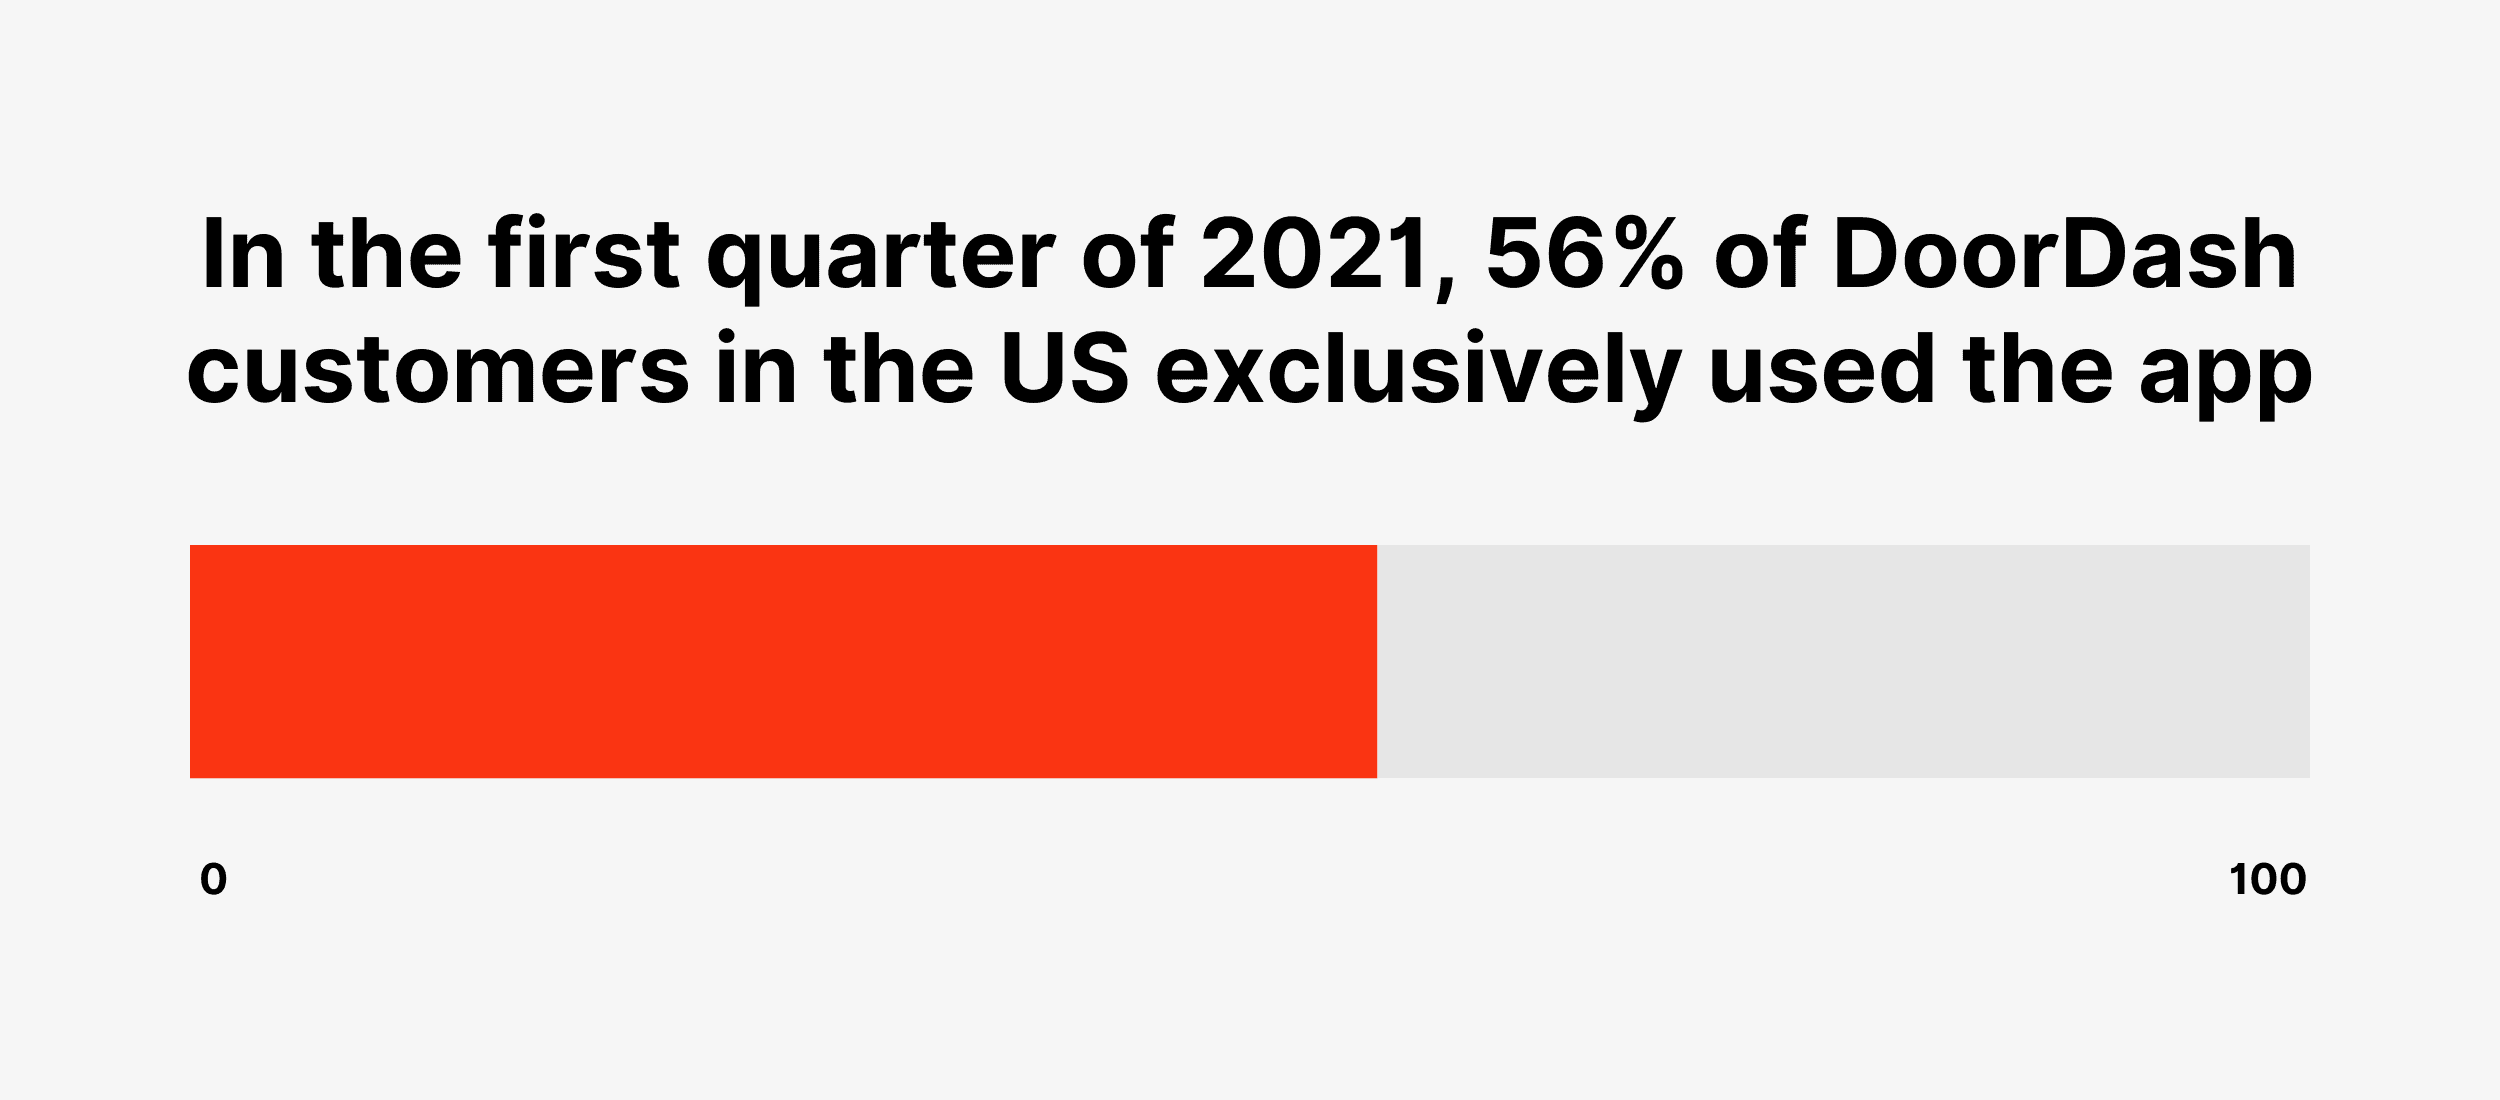 In the first quarter of 2021, 56% of DoorDash customers in the US exclusively used the app